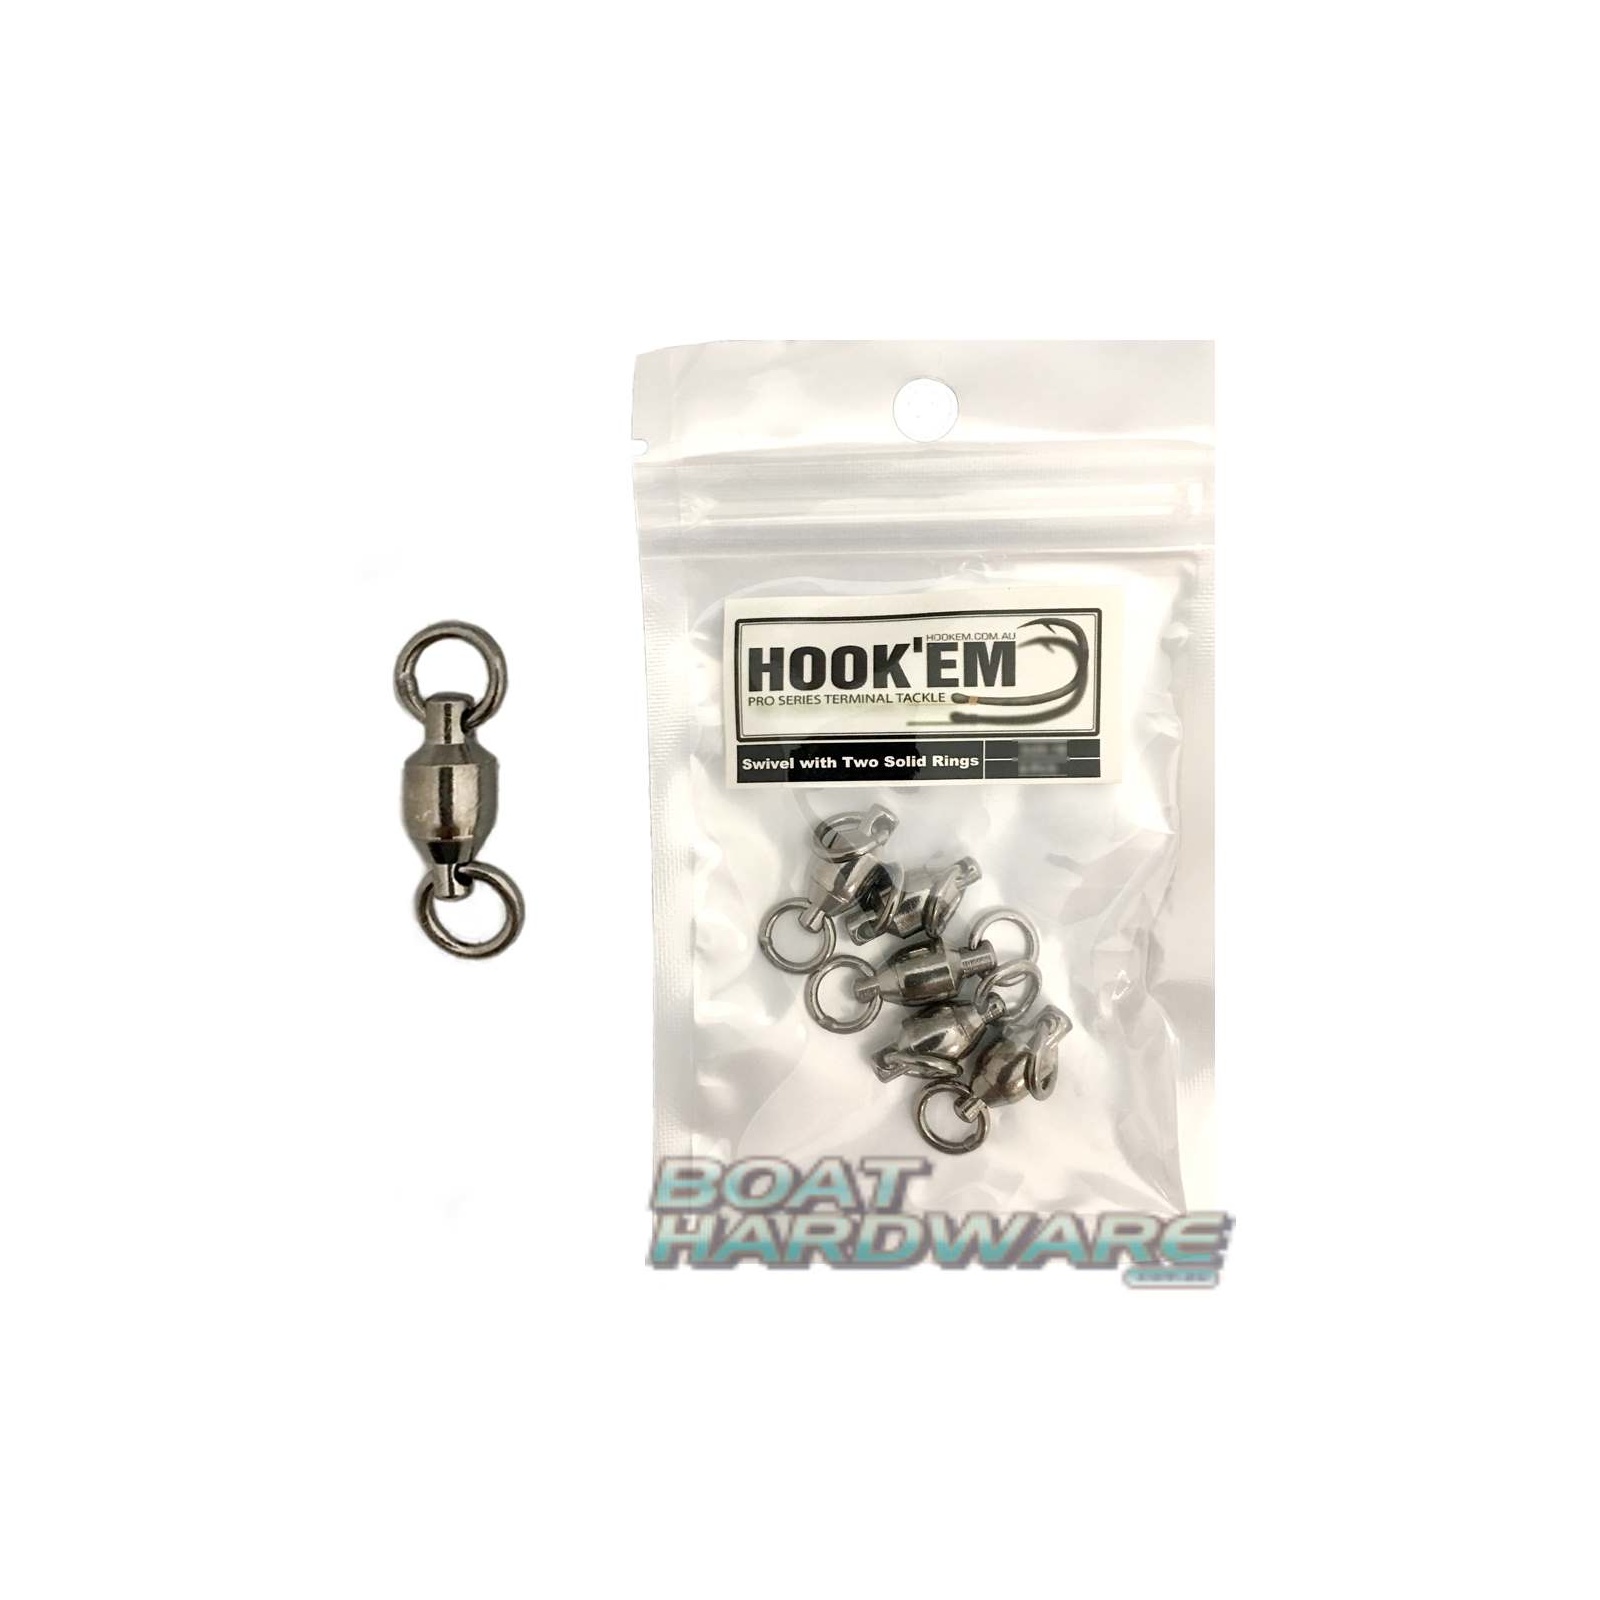 Size 3 Ball Bearing Swivel - 2 Solid Rings (Pack of 10)